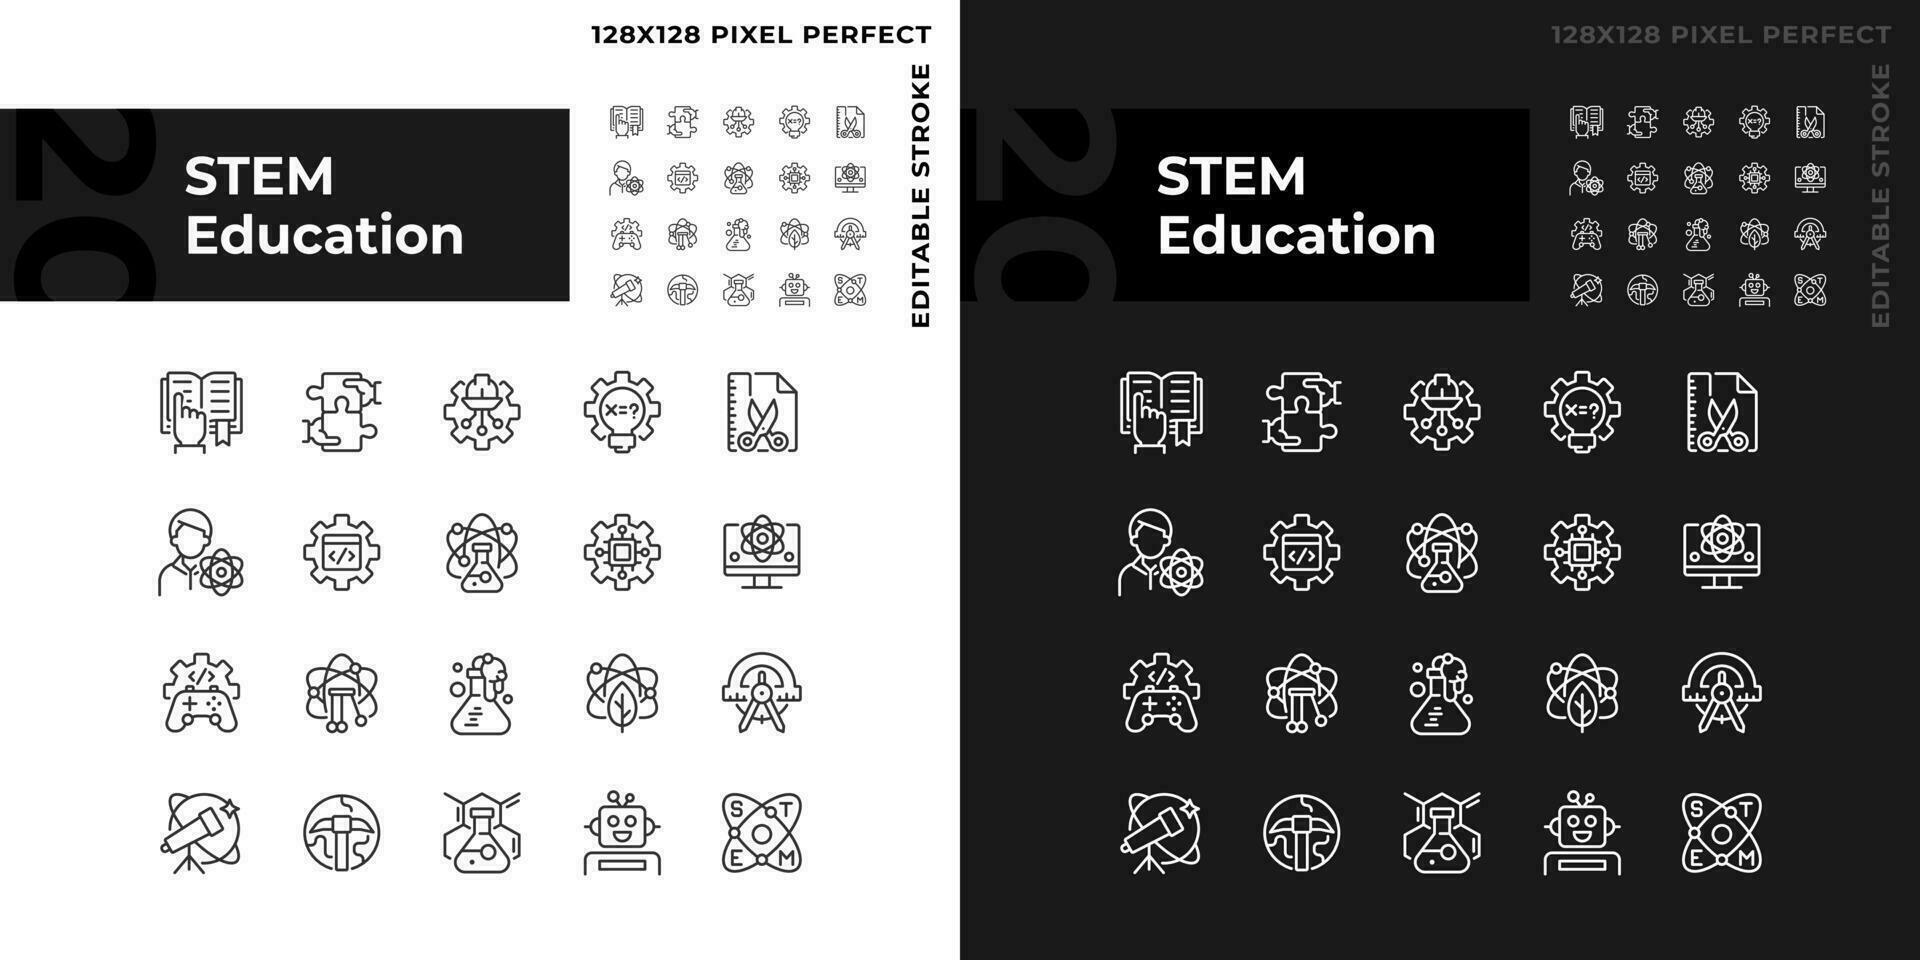 STEM education pixel perfect linear icons set for dark, light mode. Computing technology. Students development. Thin line symbols for night, day theme. Isolated illustrations. Editable stroke vector